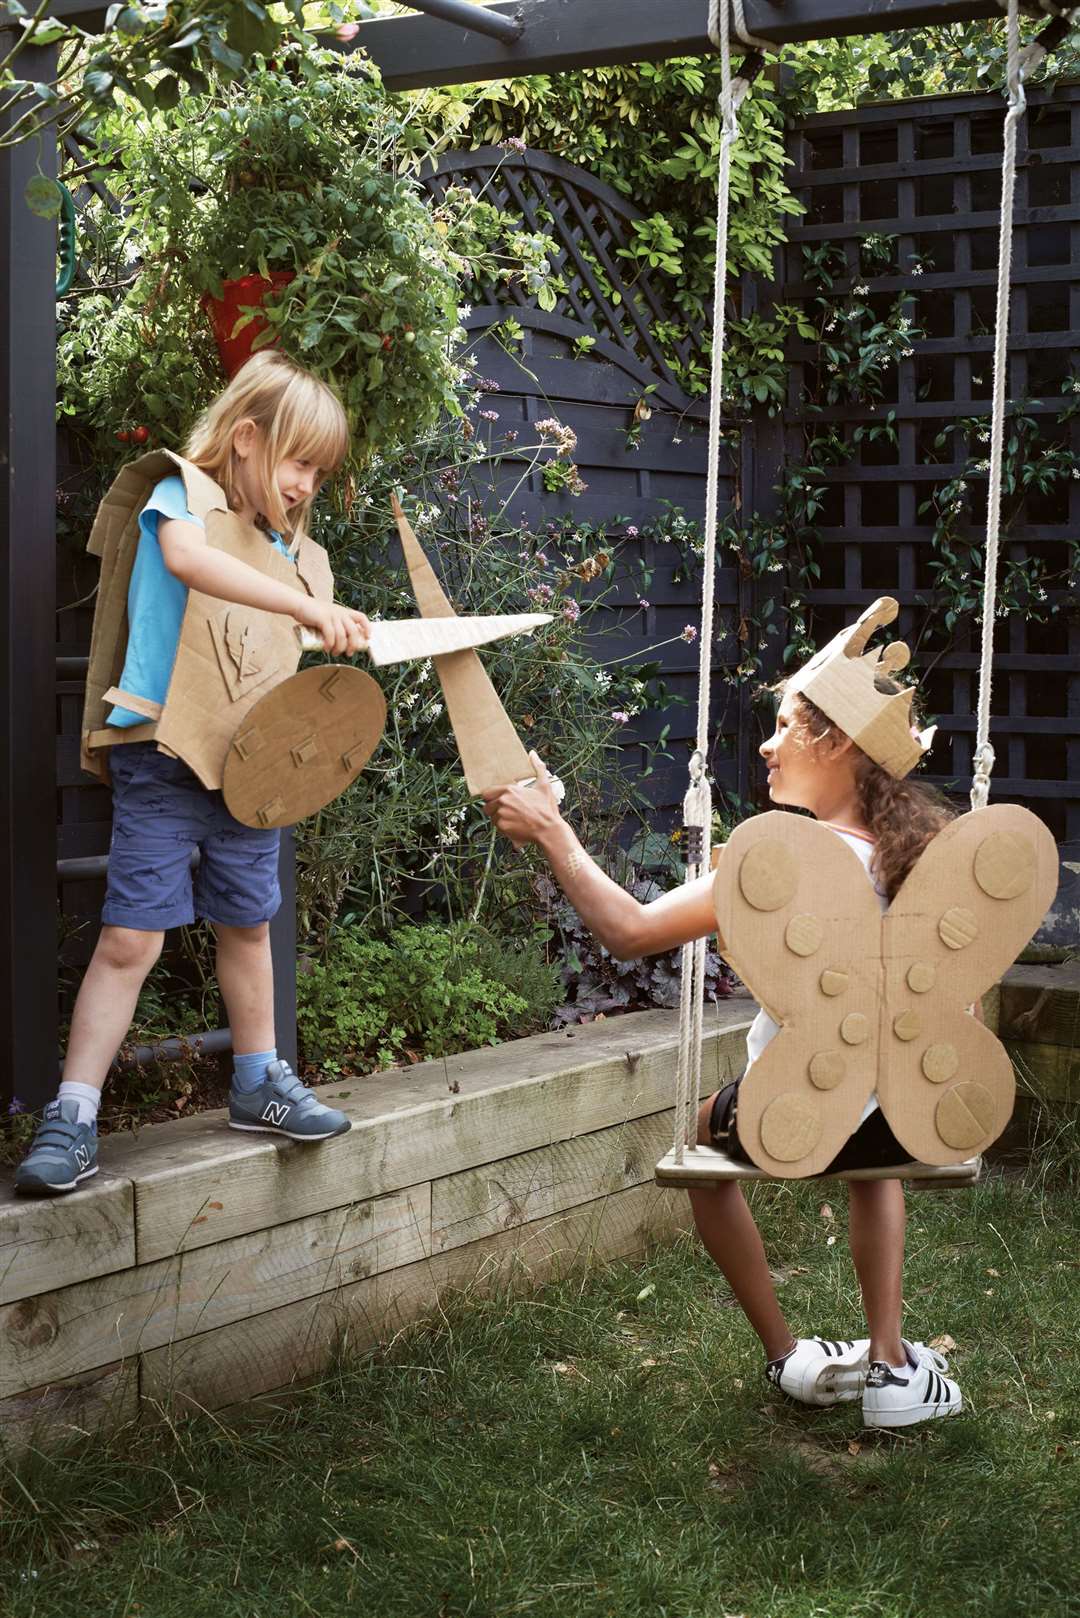 Cardboard costumes can provide hours of fun – to make and play with. Picture: Kate Whitaker/PA